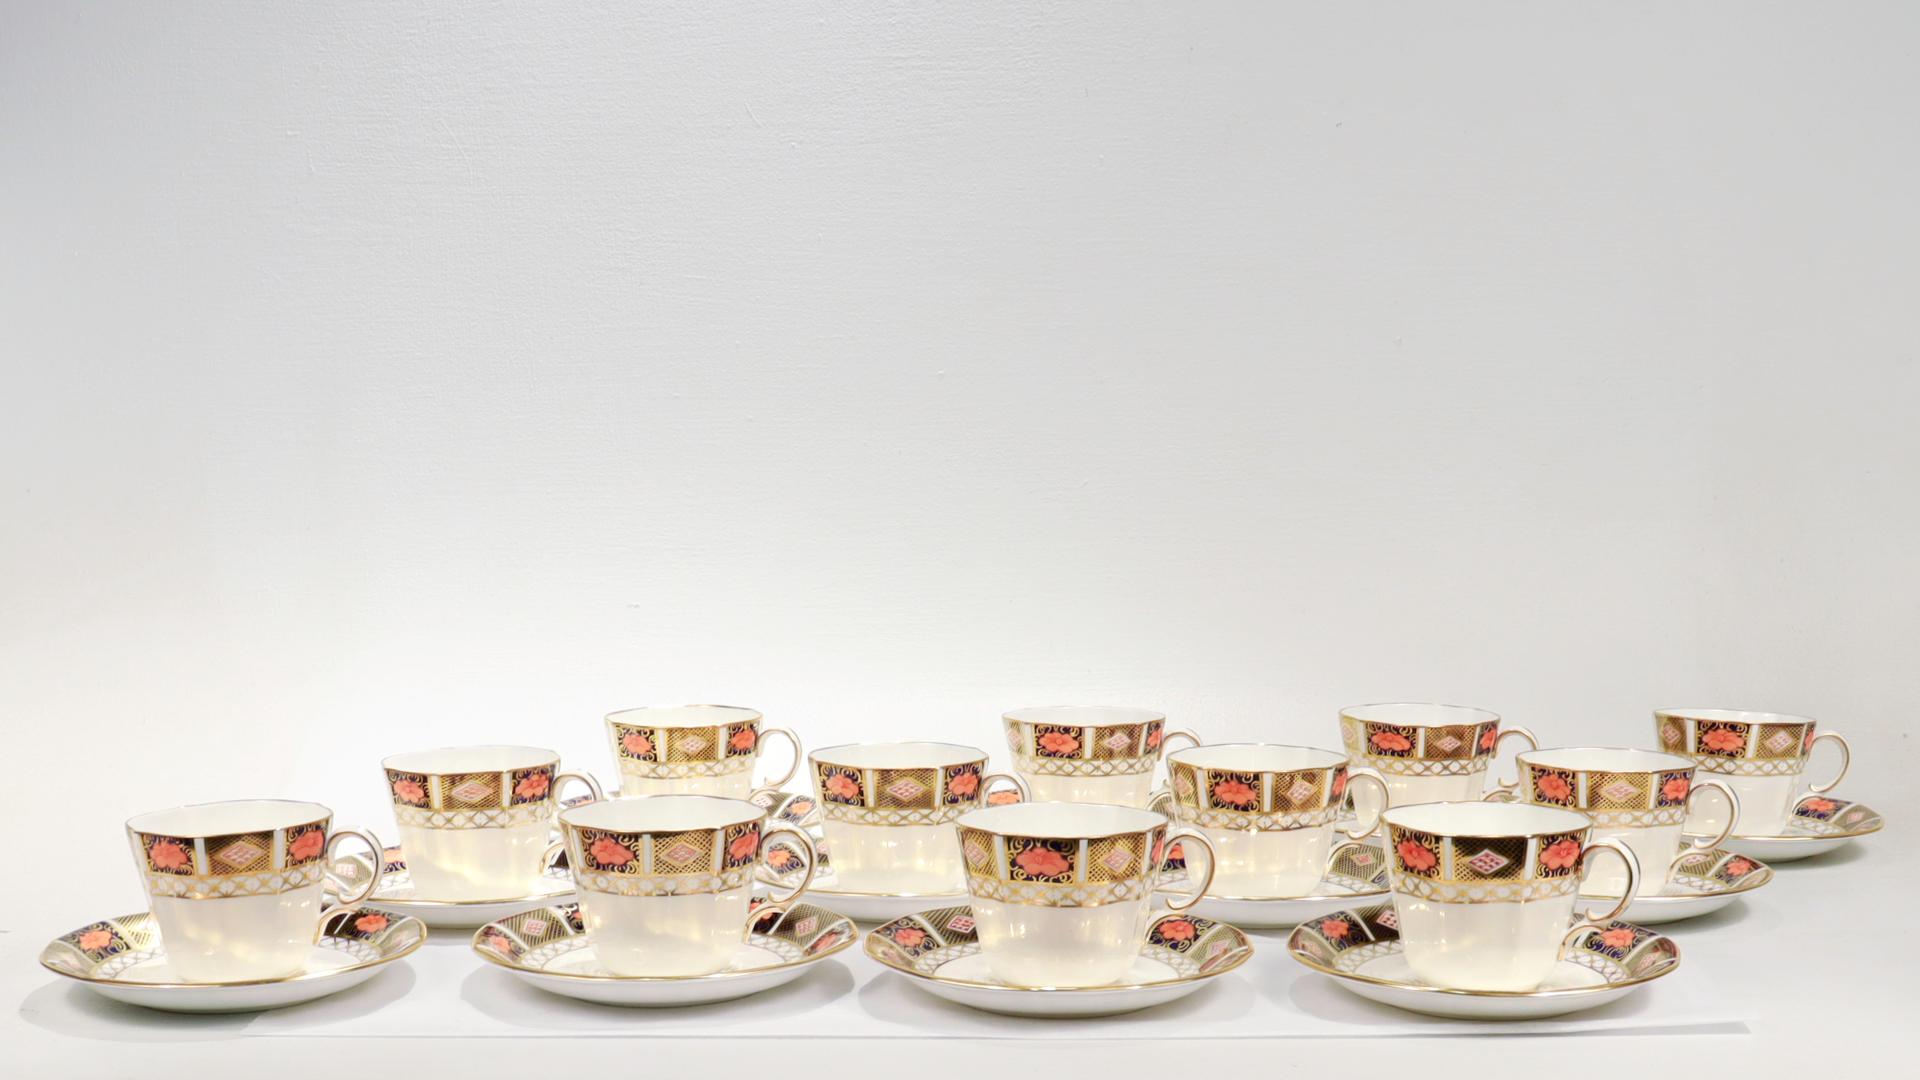 Set of 12 Royal Crown Derby Porcelain Border Imari Pattern 8450 Cups & Saucers In Good Condition For Sale In Philadelphia, PA